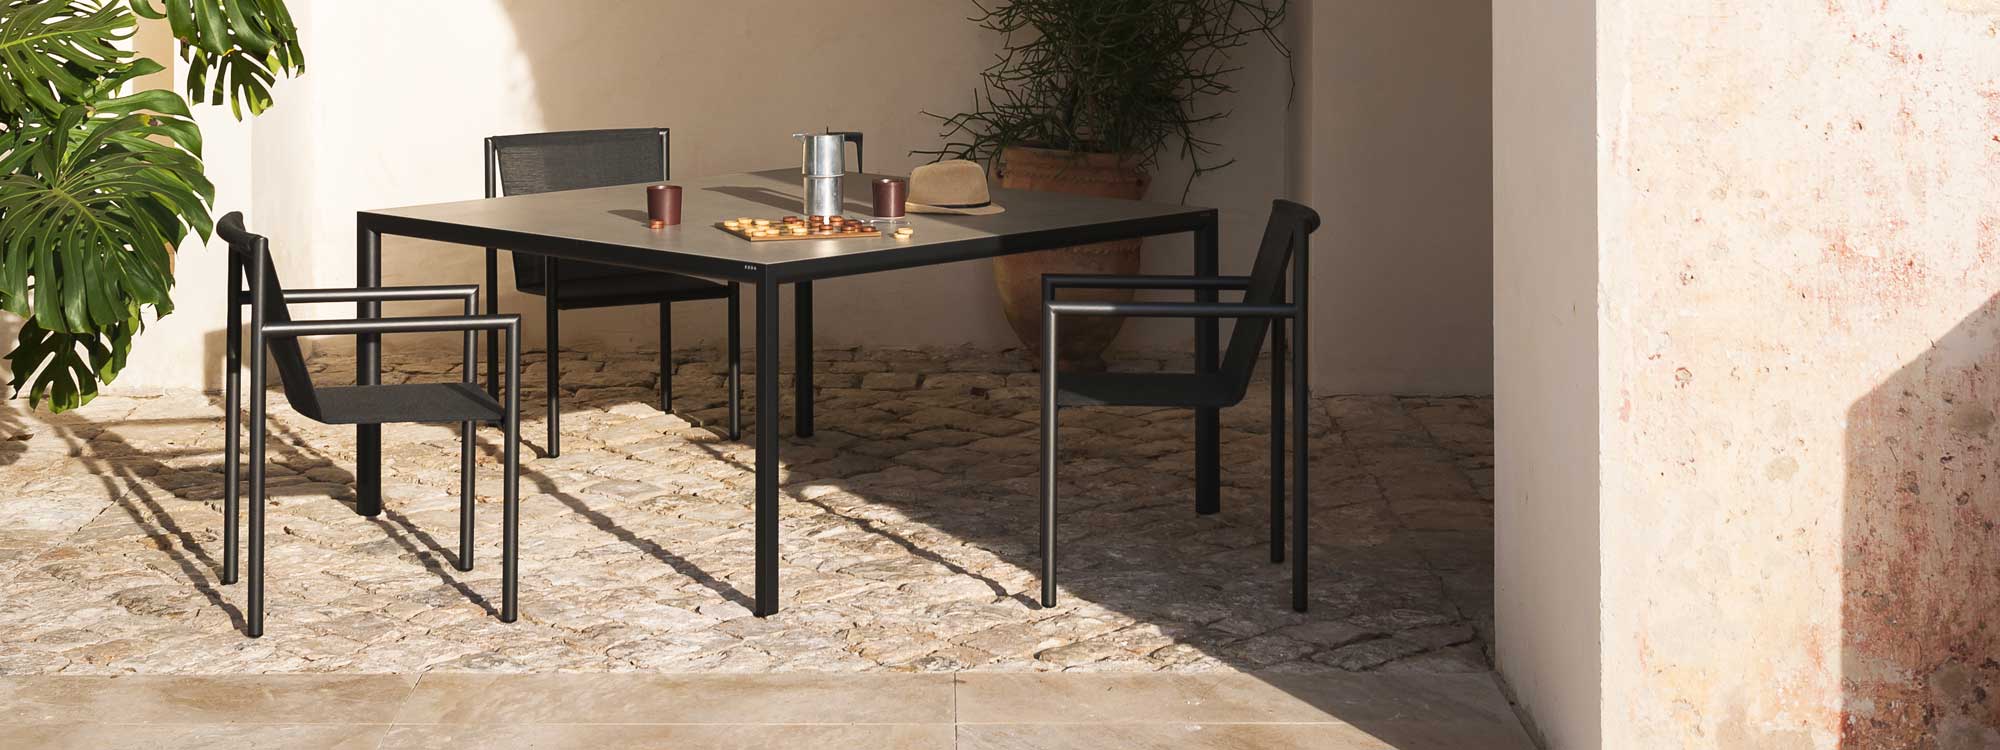 Image of Plein Air minimalist garden chairs and large square dining table by RODA, in sun and shade of hot rustic terrace